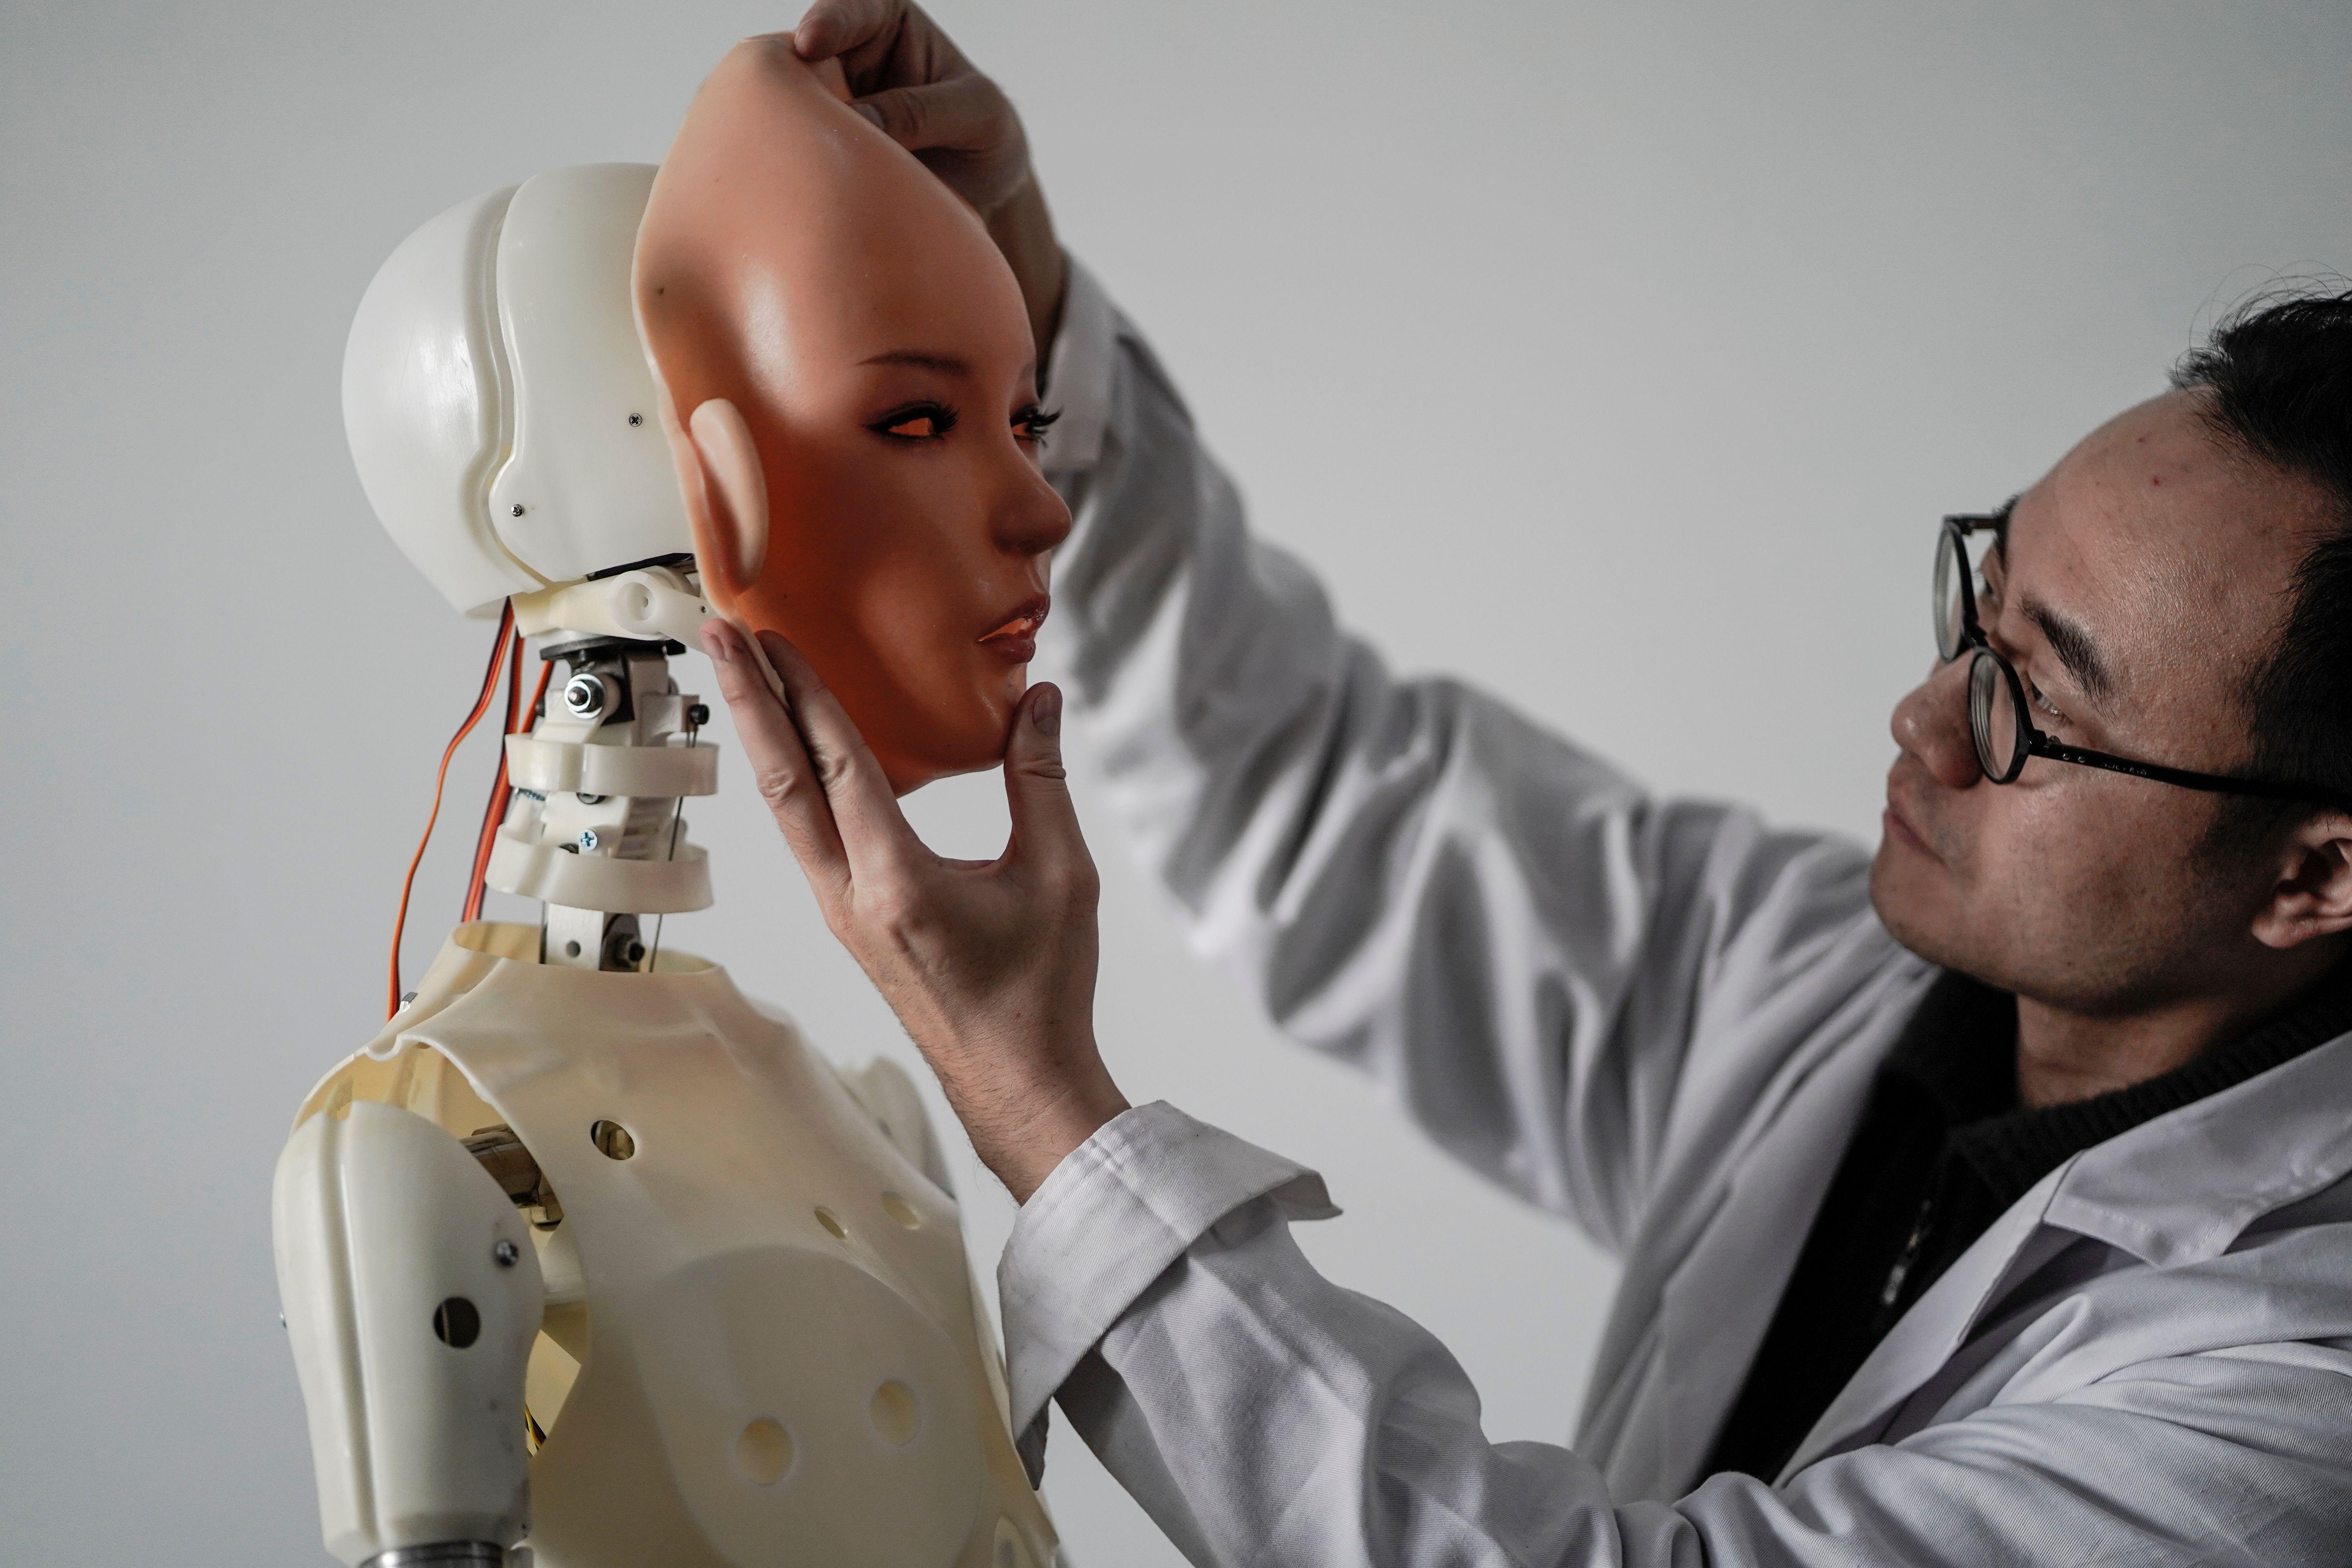 An engineer attaches a rubber face to a not-very-convincing-looking sex robot.